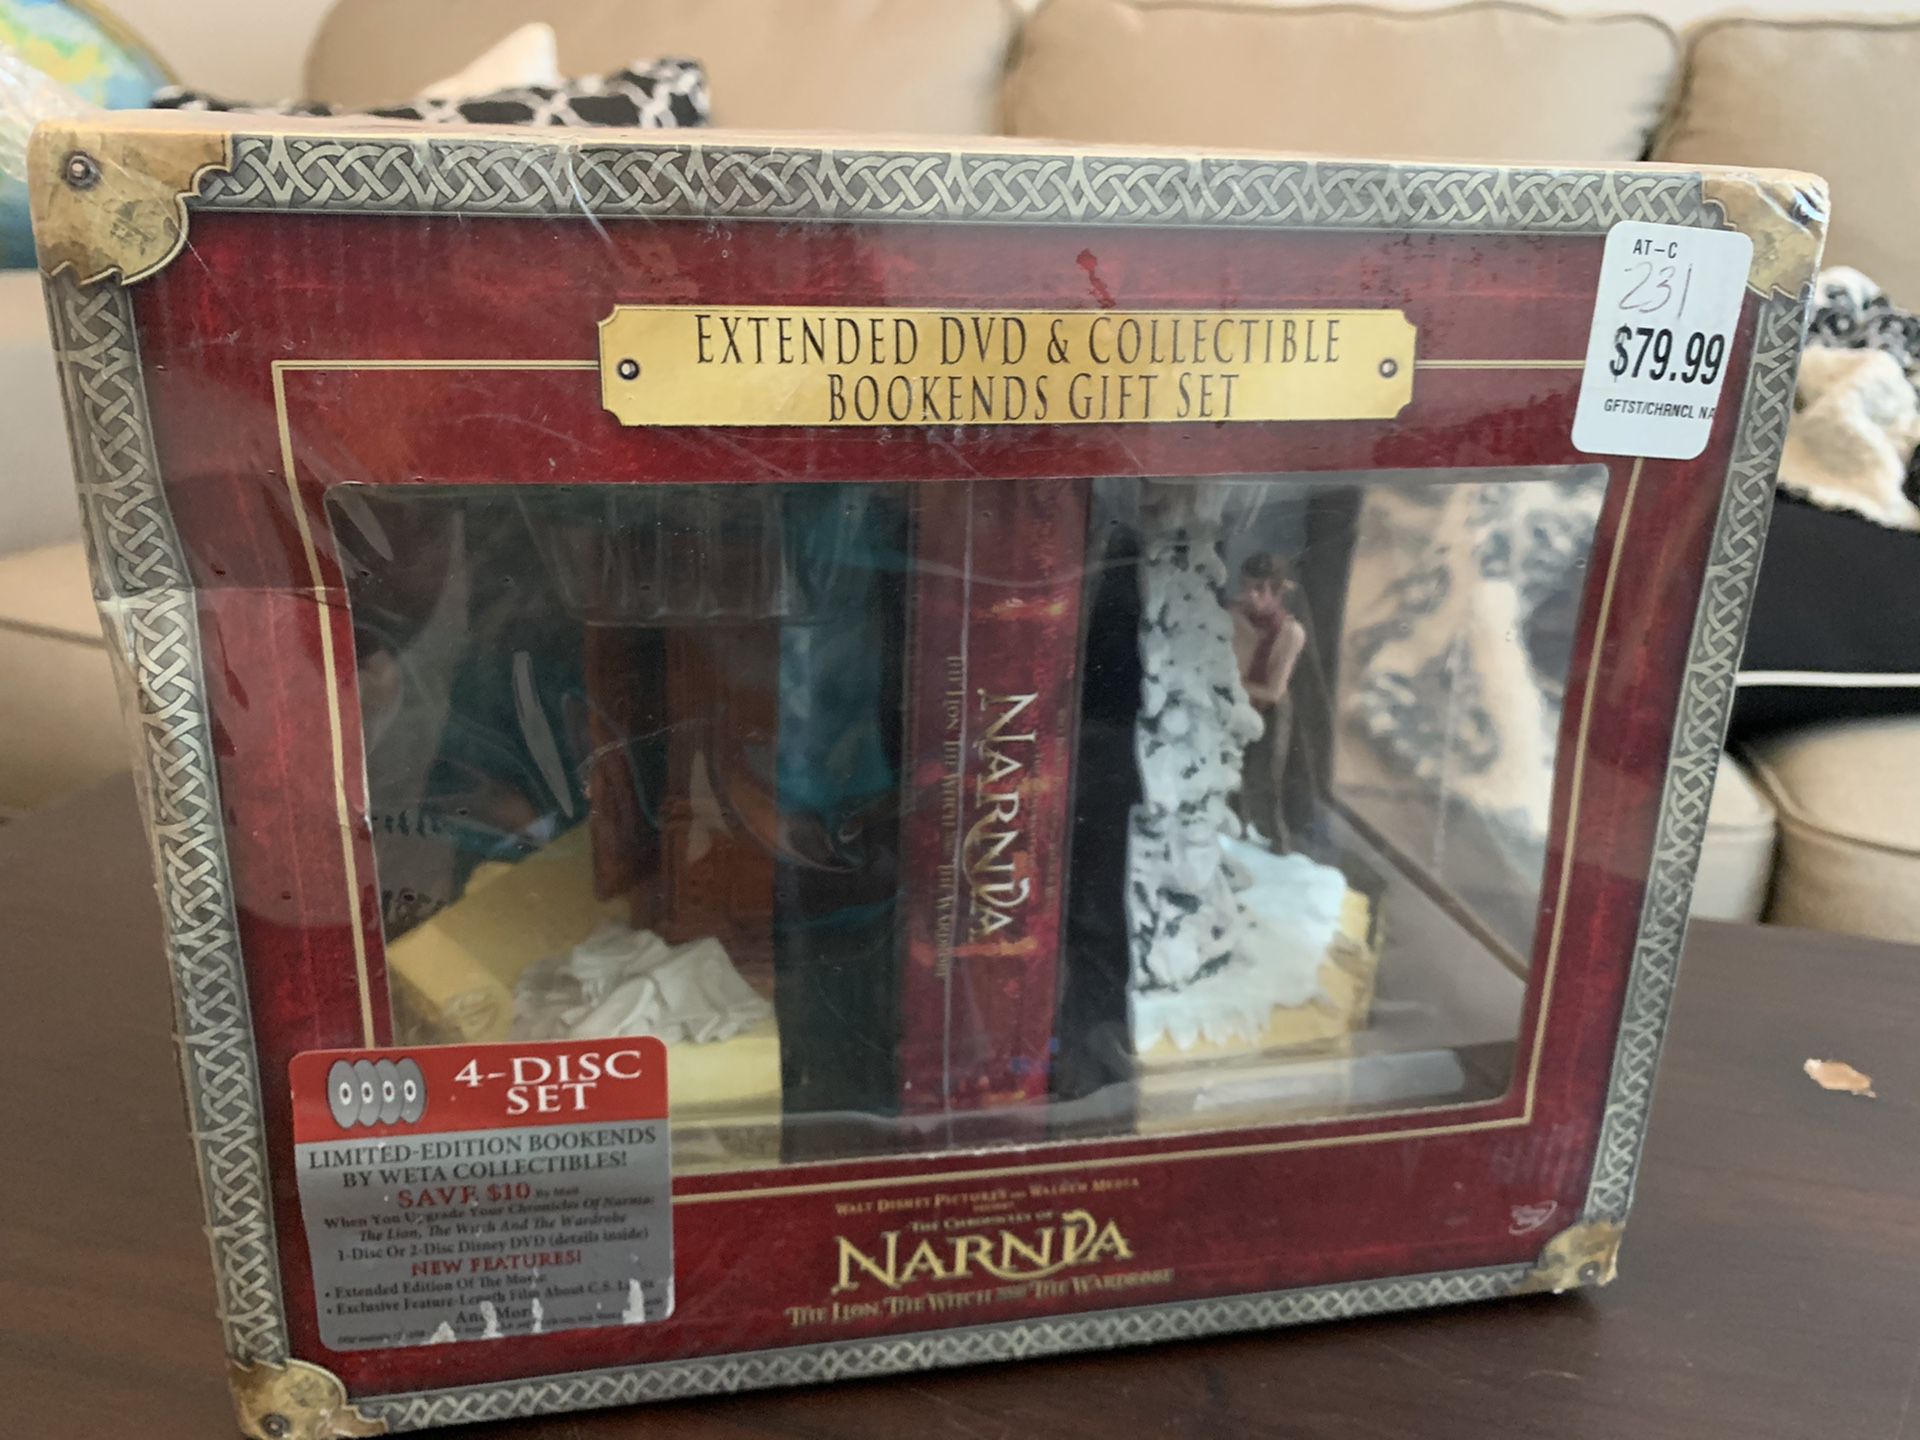 Chronicles of Narnia DVD collectible bookends gift set